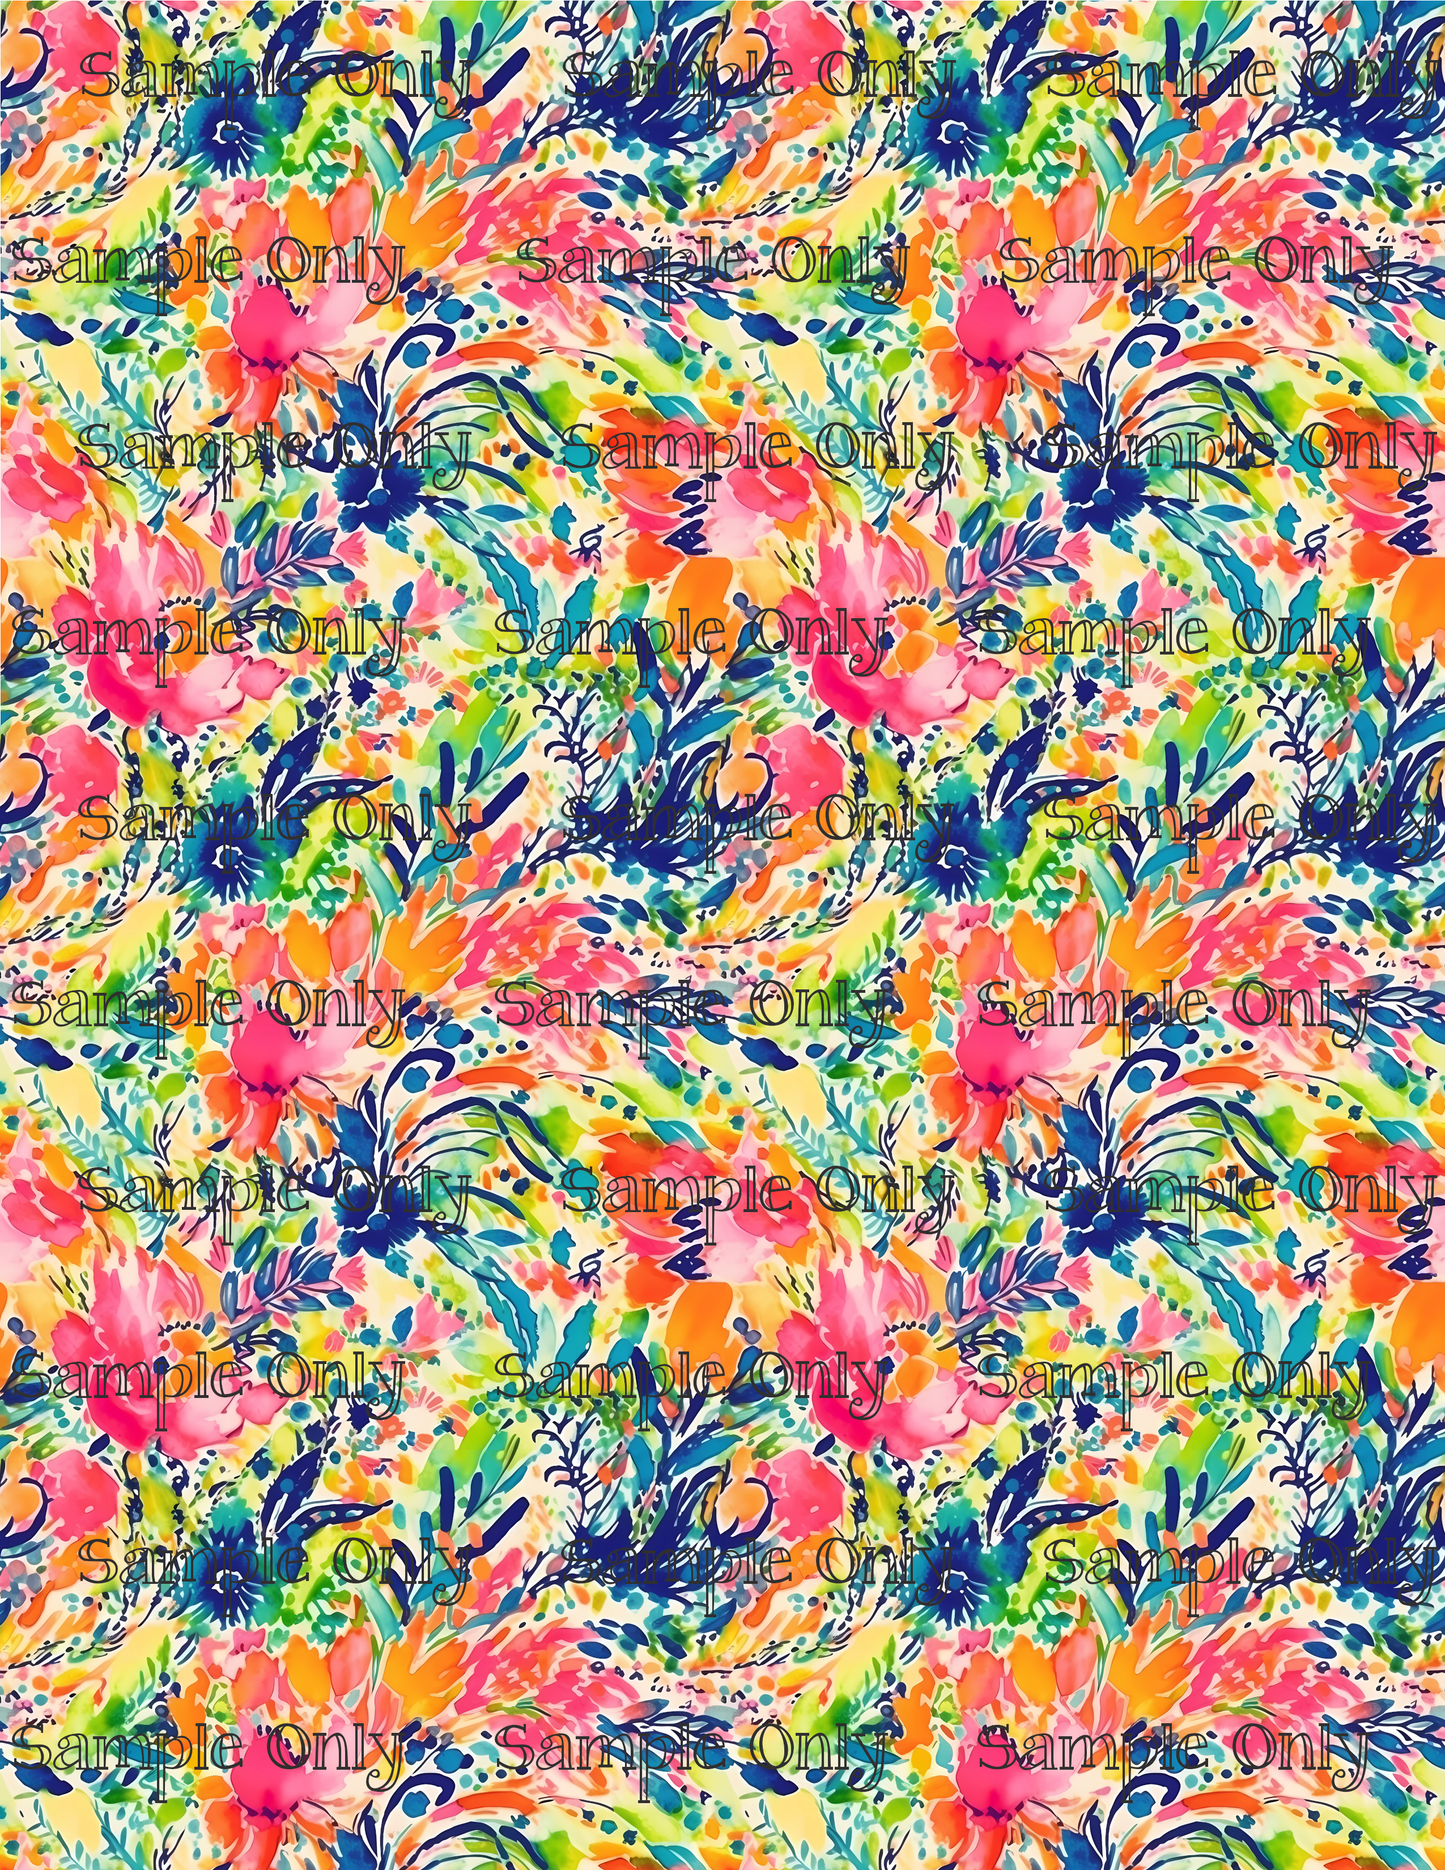 Painterly Bright Floral 02 Image Sheet For Polymer Clay Transfer Decal DIGITAL FILE OR PRINTED